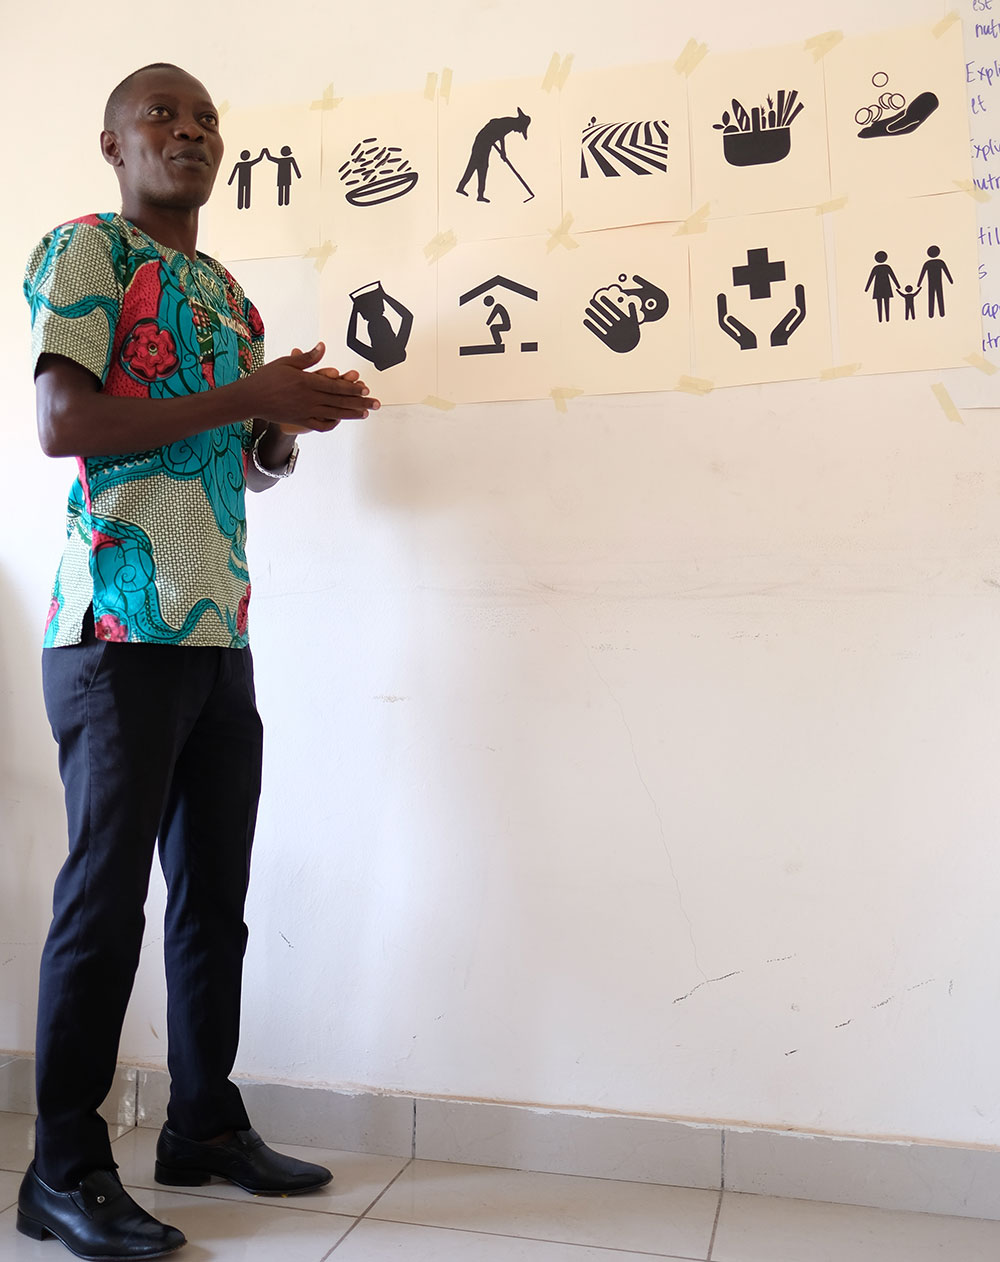 A participant, Millimounda, shares how his group views the connection between agriculture and nutrition.